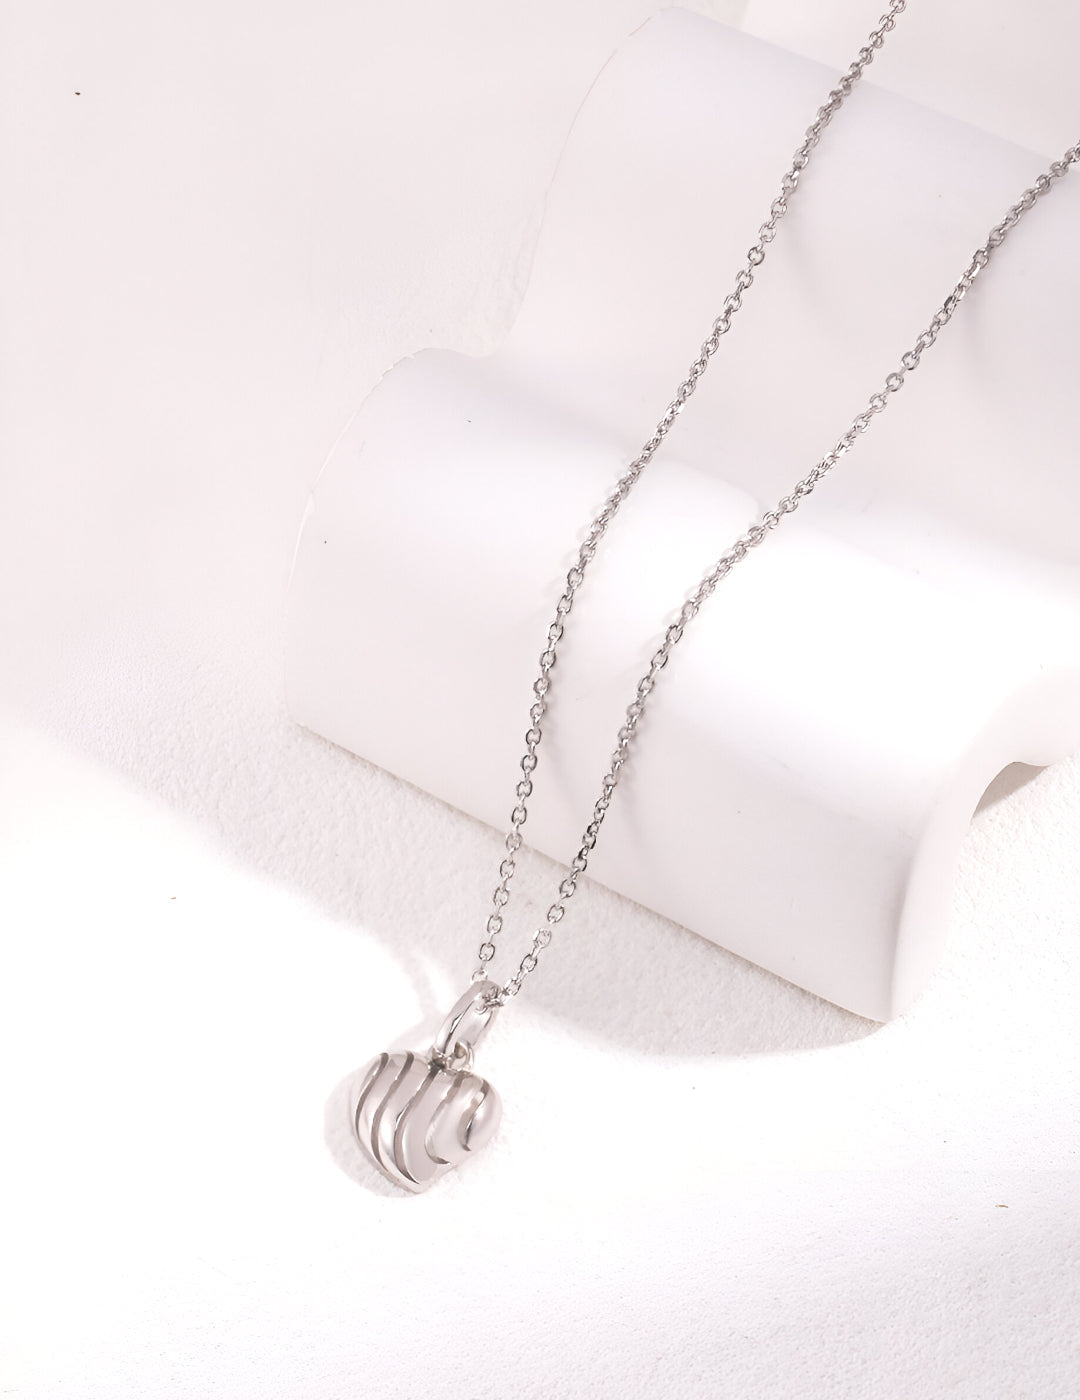 Heart-shaped necklace with Wavy Texture - S925 Sterling Silver with 18K Gold Vermeil -  Symbolizes love and passion - Embrace love and grace with this stunning piece